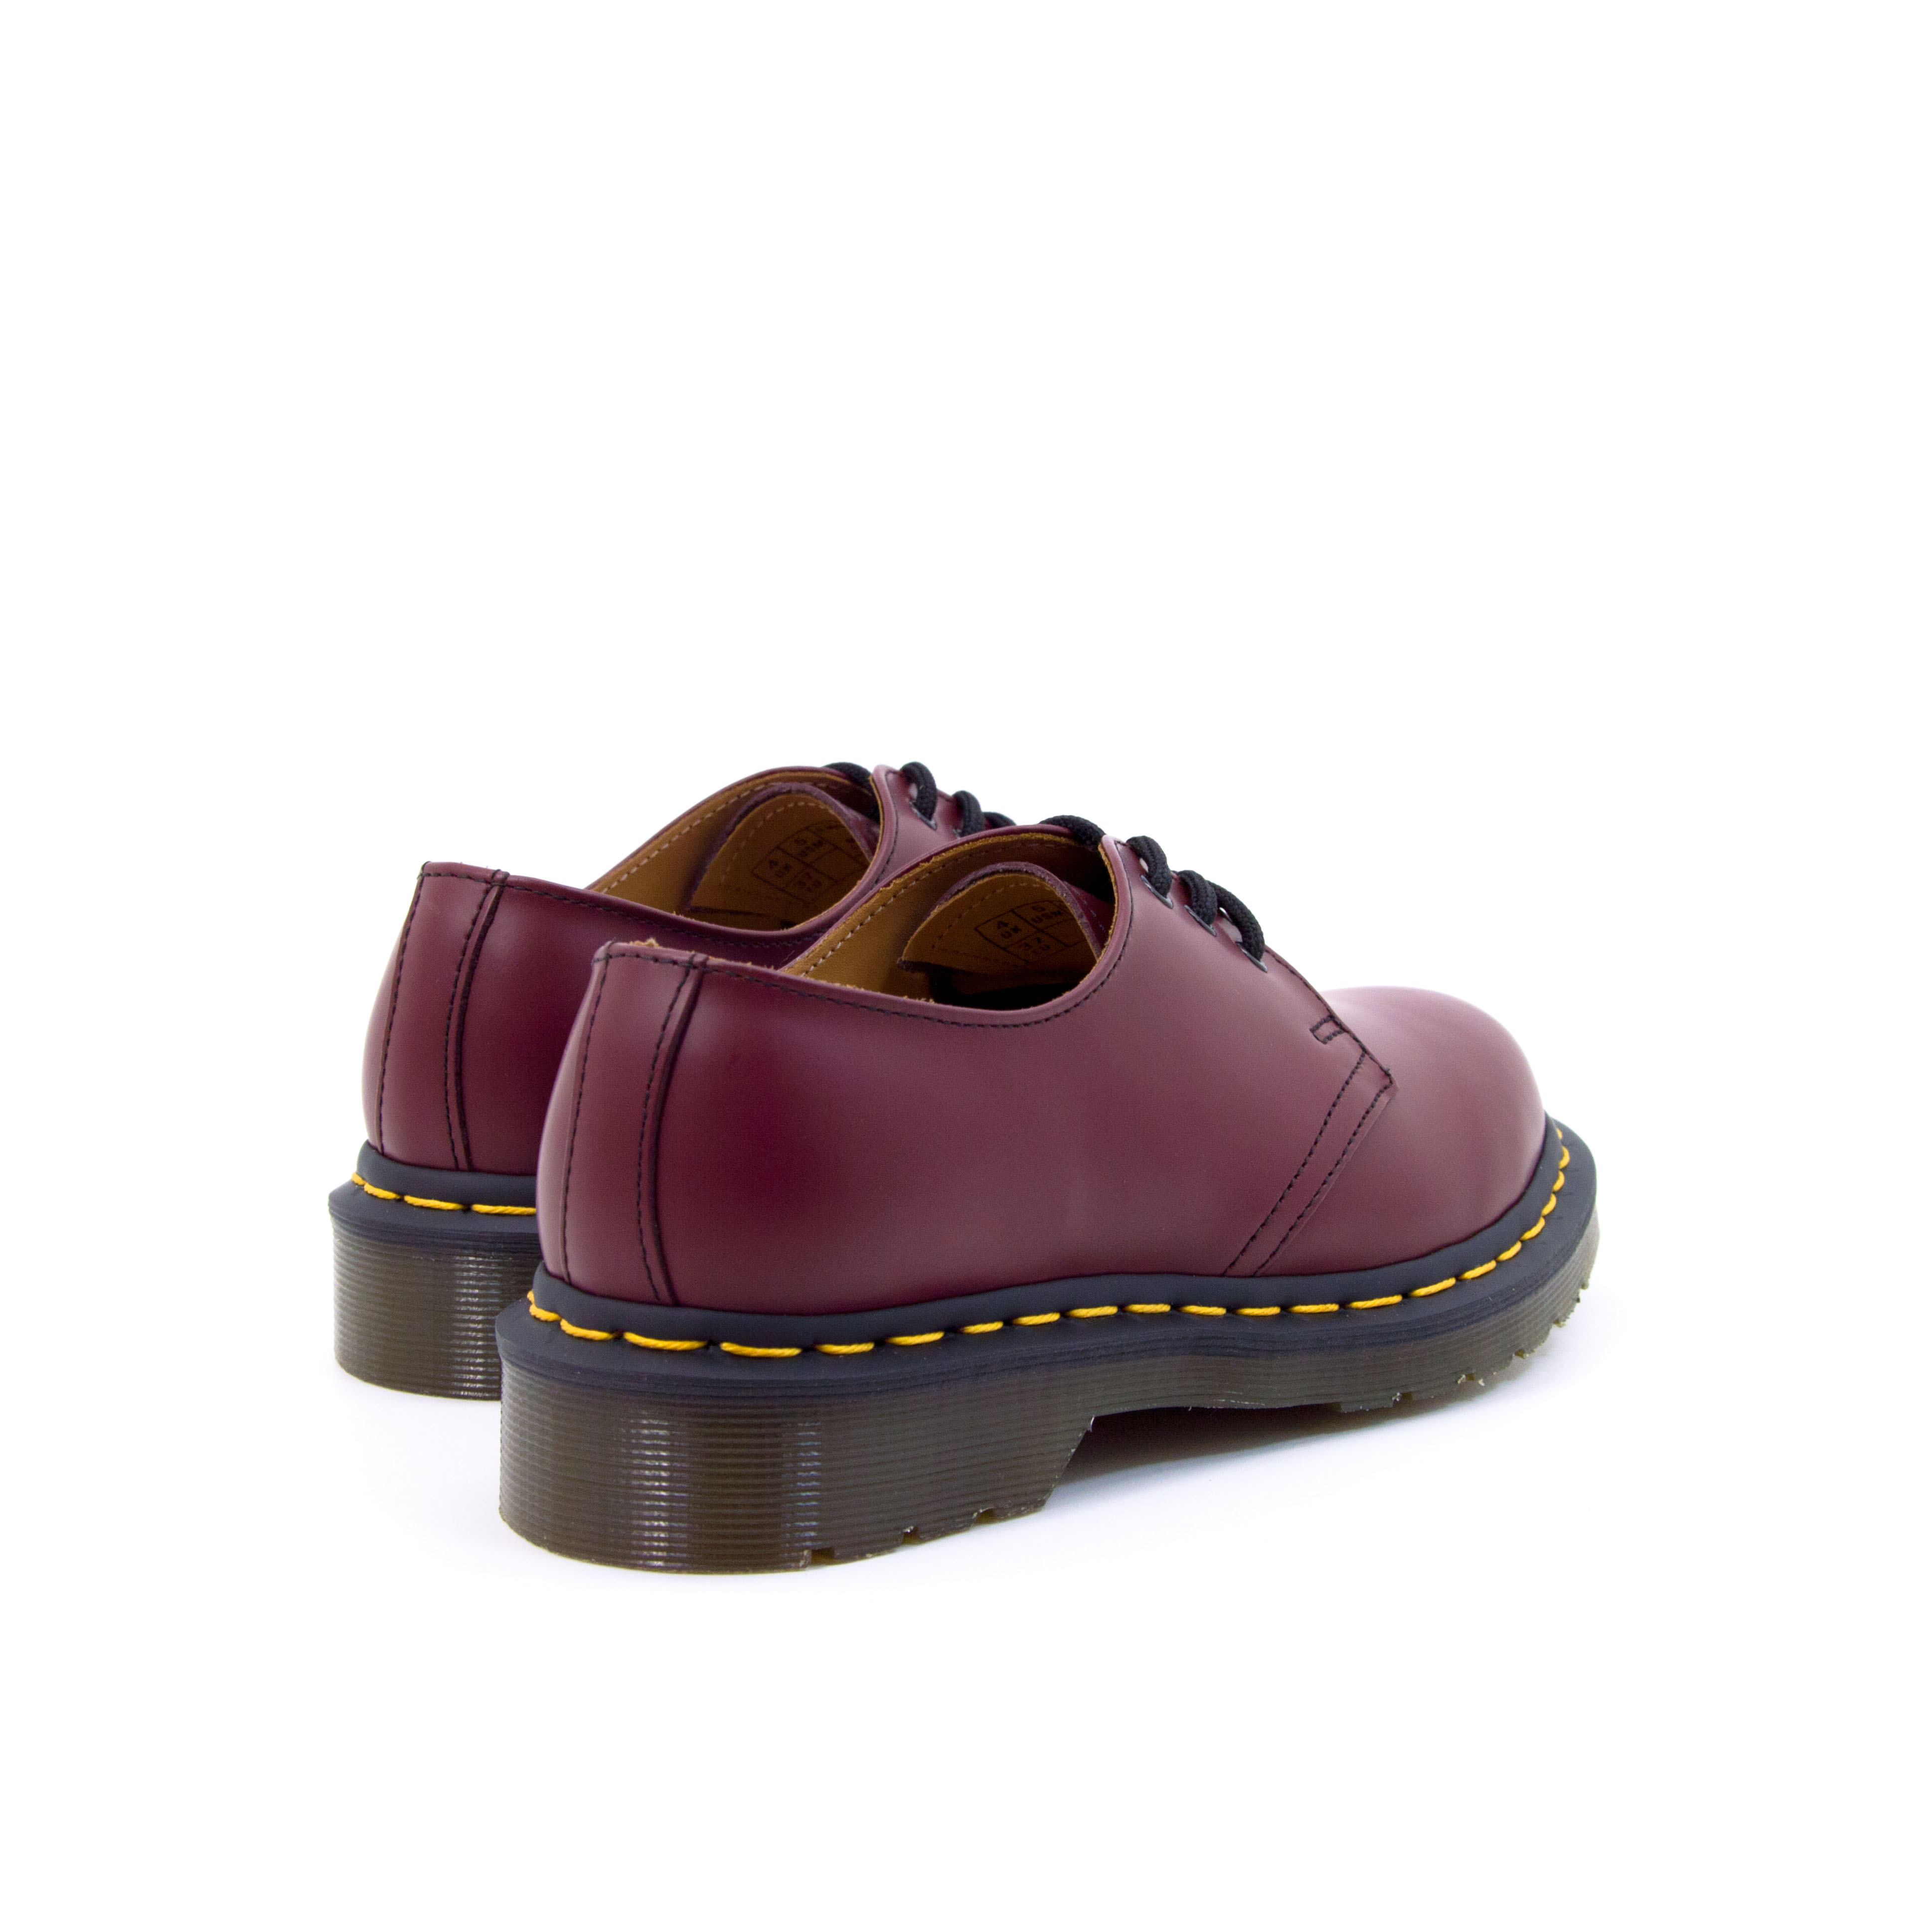 Dr. Martens - 1461 - Cherry Red Smooth